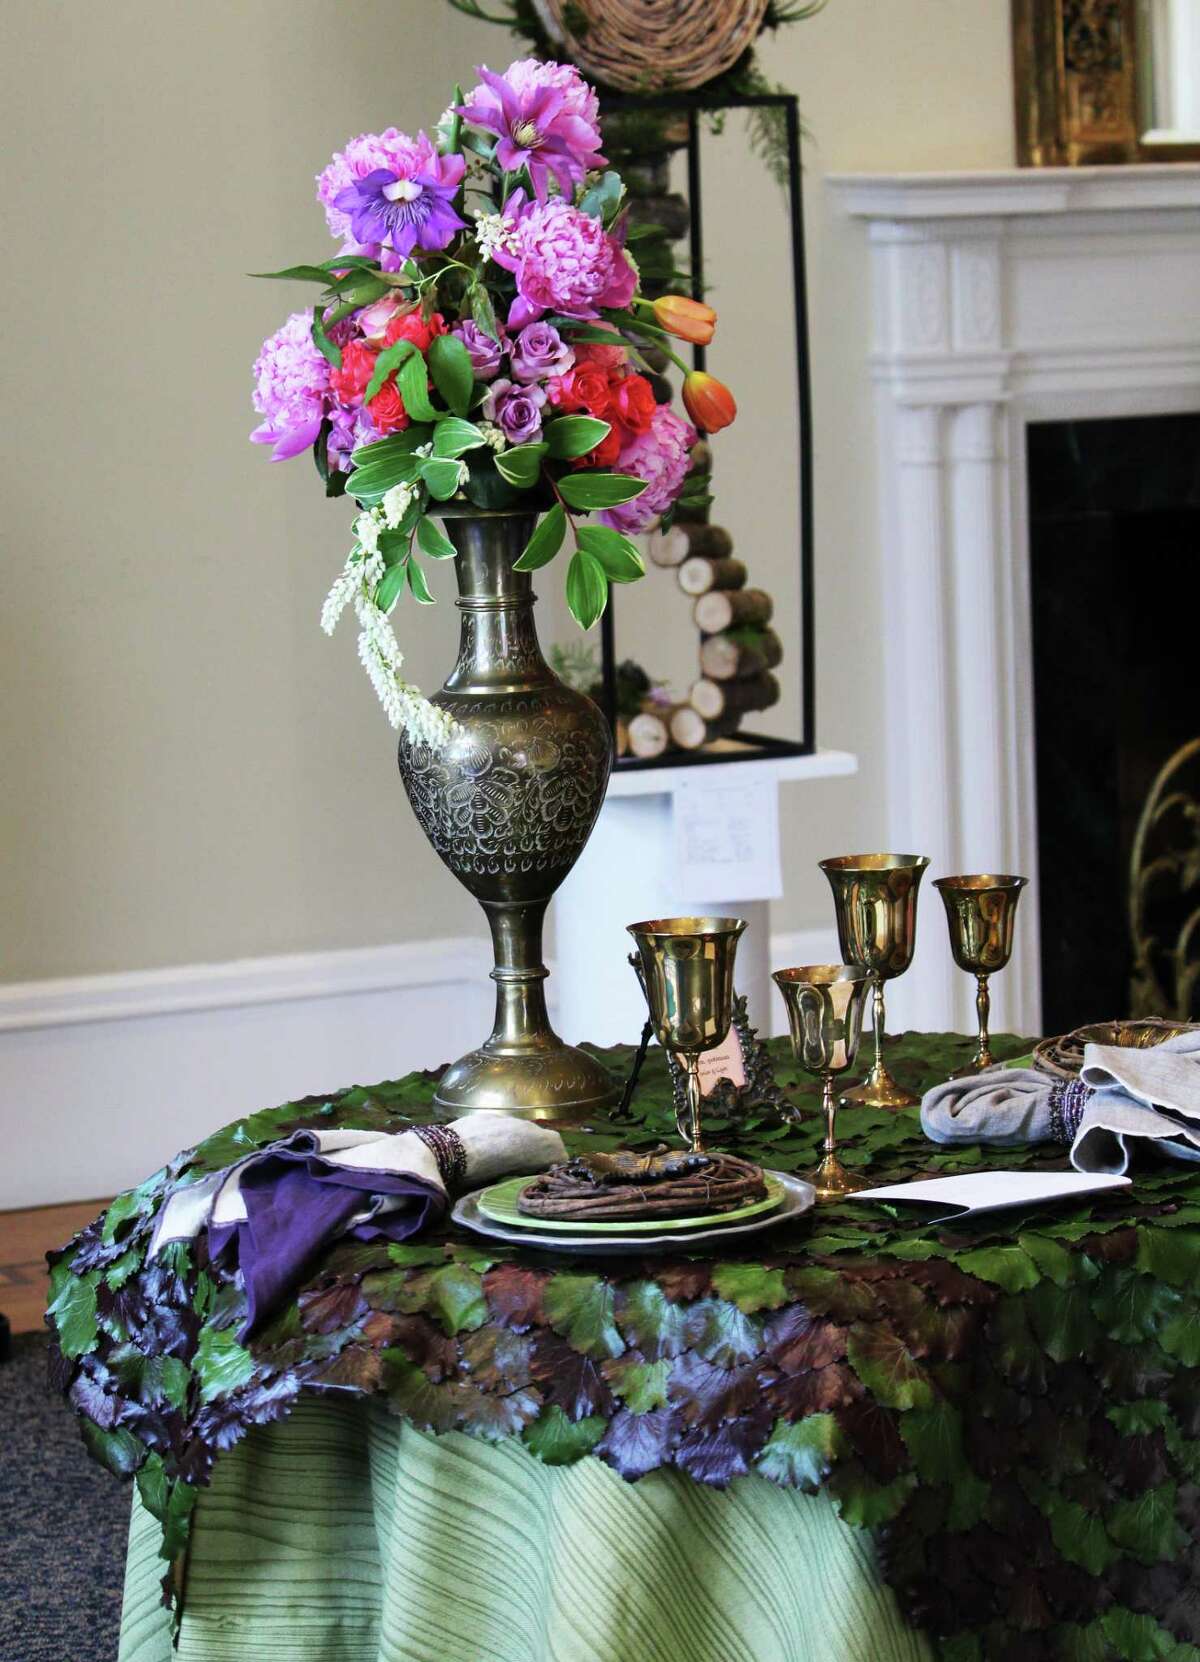 The Middletown Garden Club annual flower show, which is free and open to the public Thursday at the Wadsworth Mansion on Wadsworth Street, focuses on the theme, “The Enduring Inspiration of Trees.”